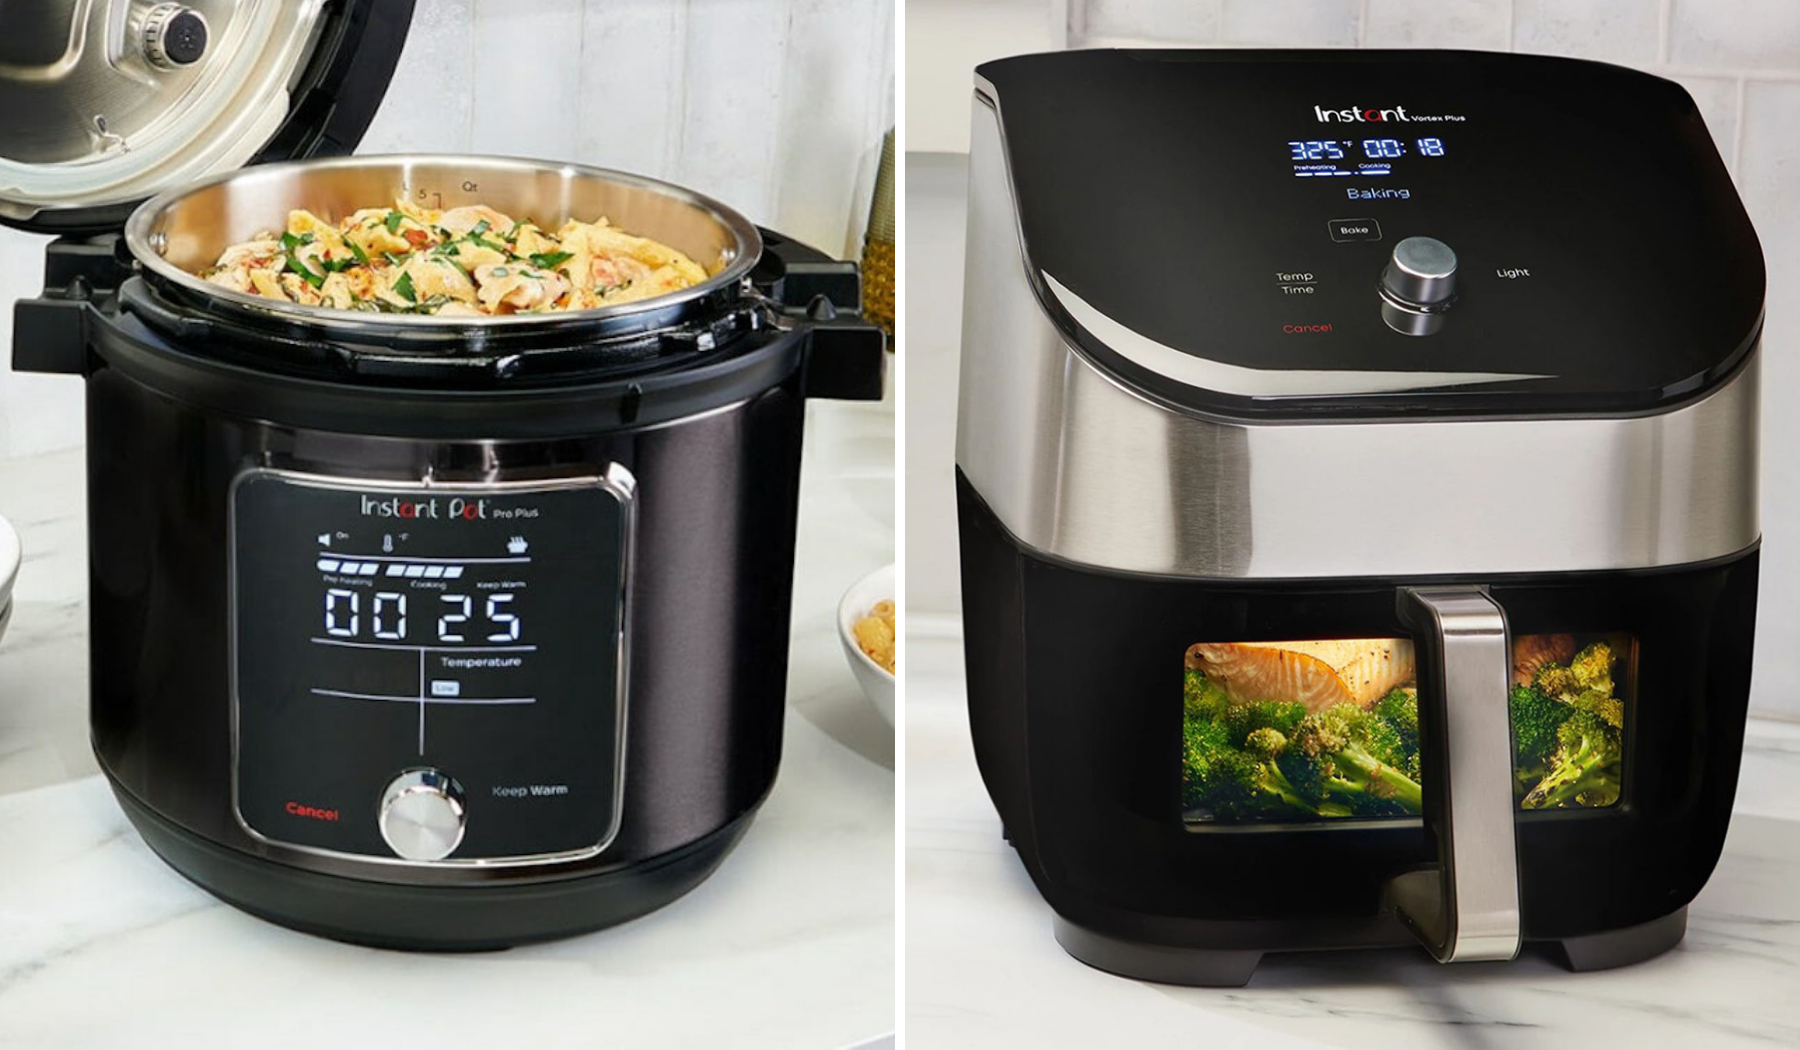 The Instant Pot Pro Plus pressure cooker and the Instant Vortex Plus air fryer side by side